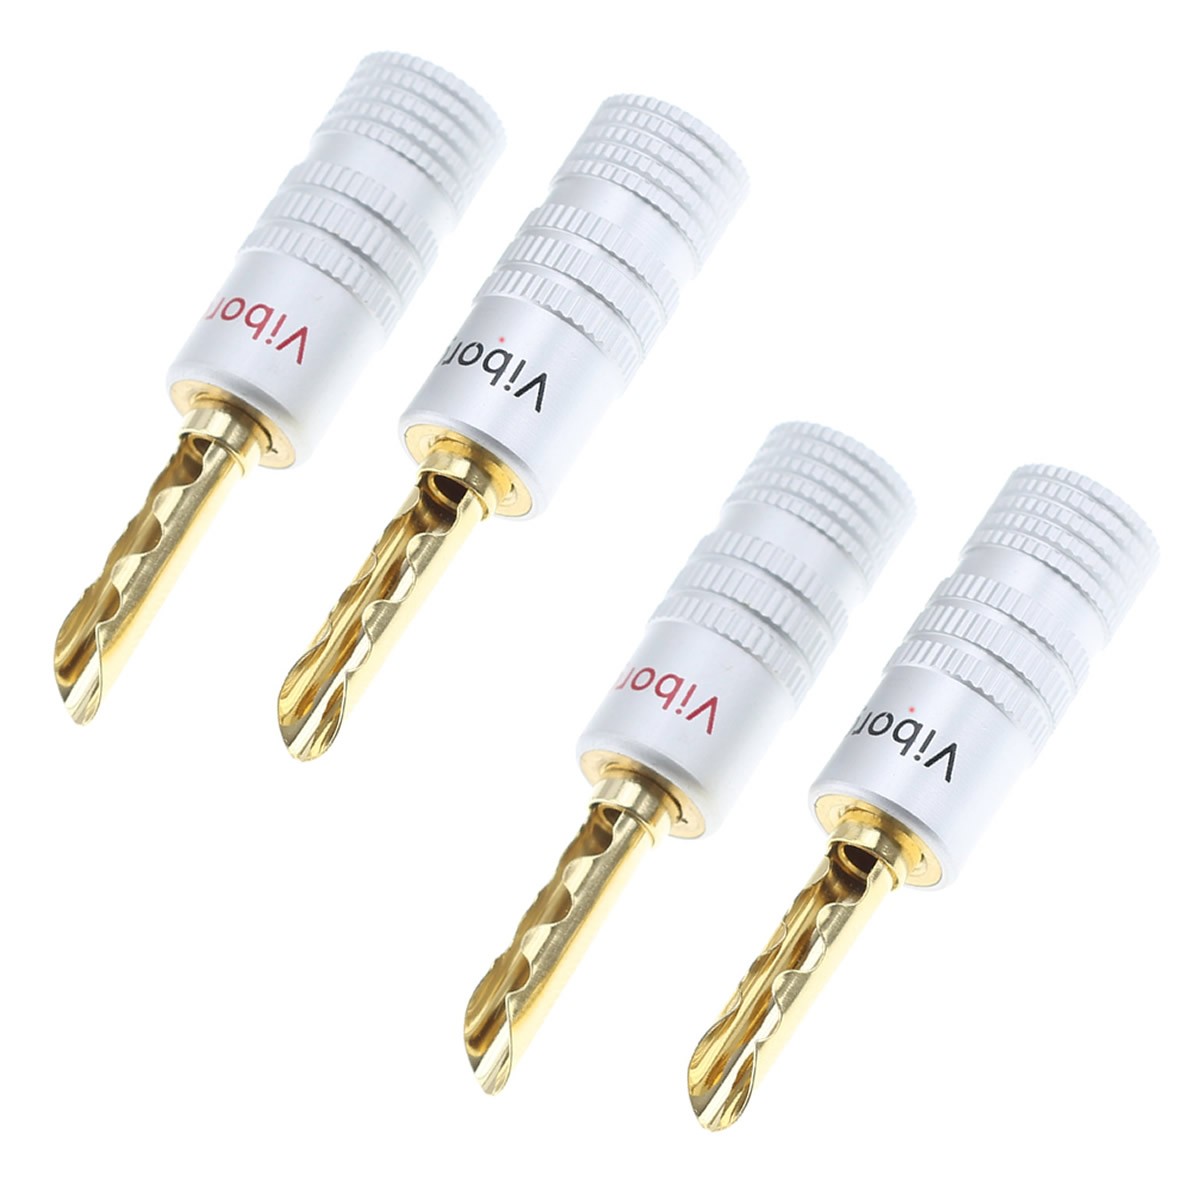 Gold Plated Speaker Terminal Binding Post Amplifier Connector Suitable For  5mm Banana Plug Connectors Solder Audio Adapter